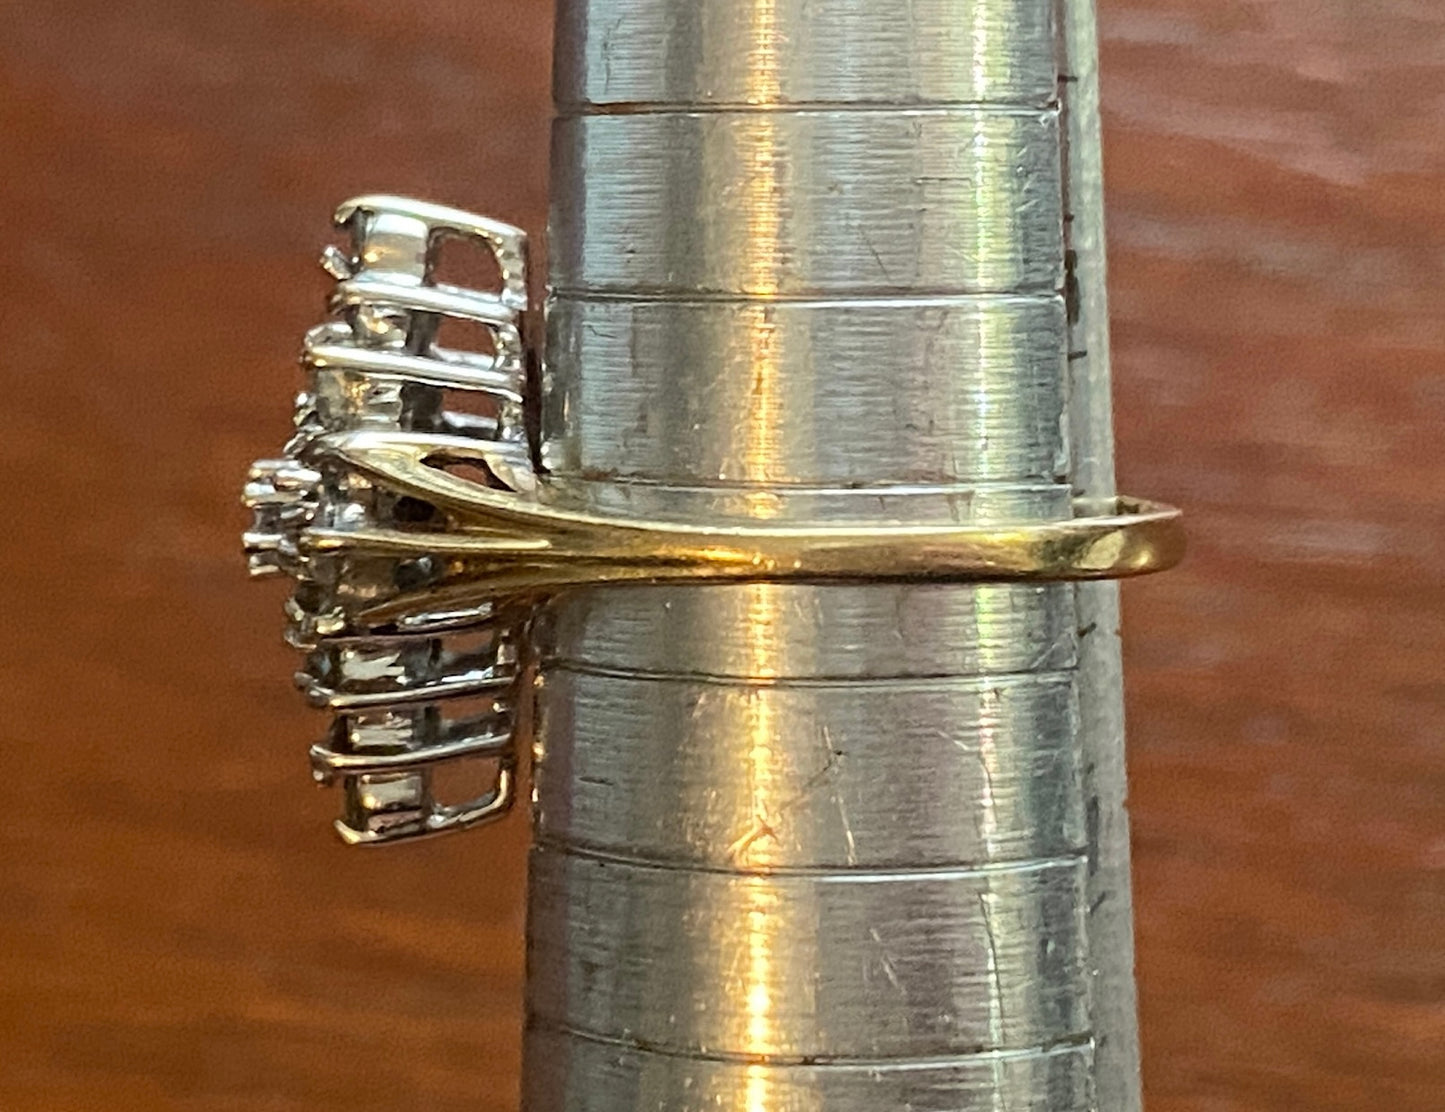 10k Yellow Gold 1ctw Round Diamond Cluster Cocktail Ring Sz 5.75